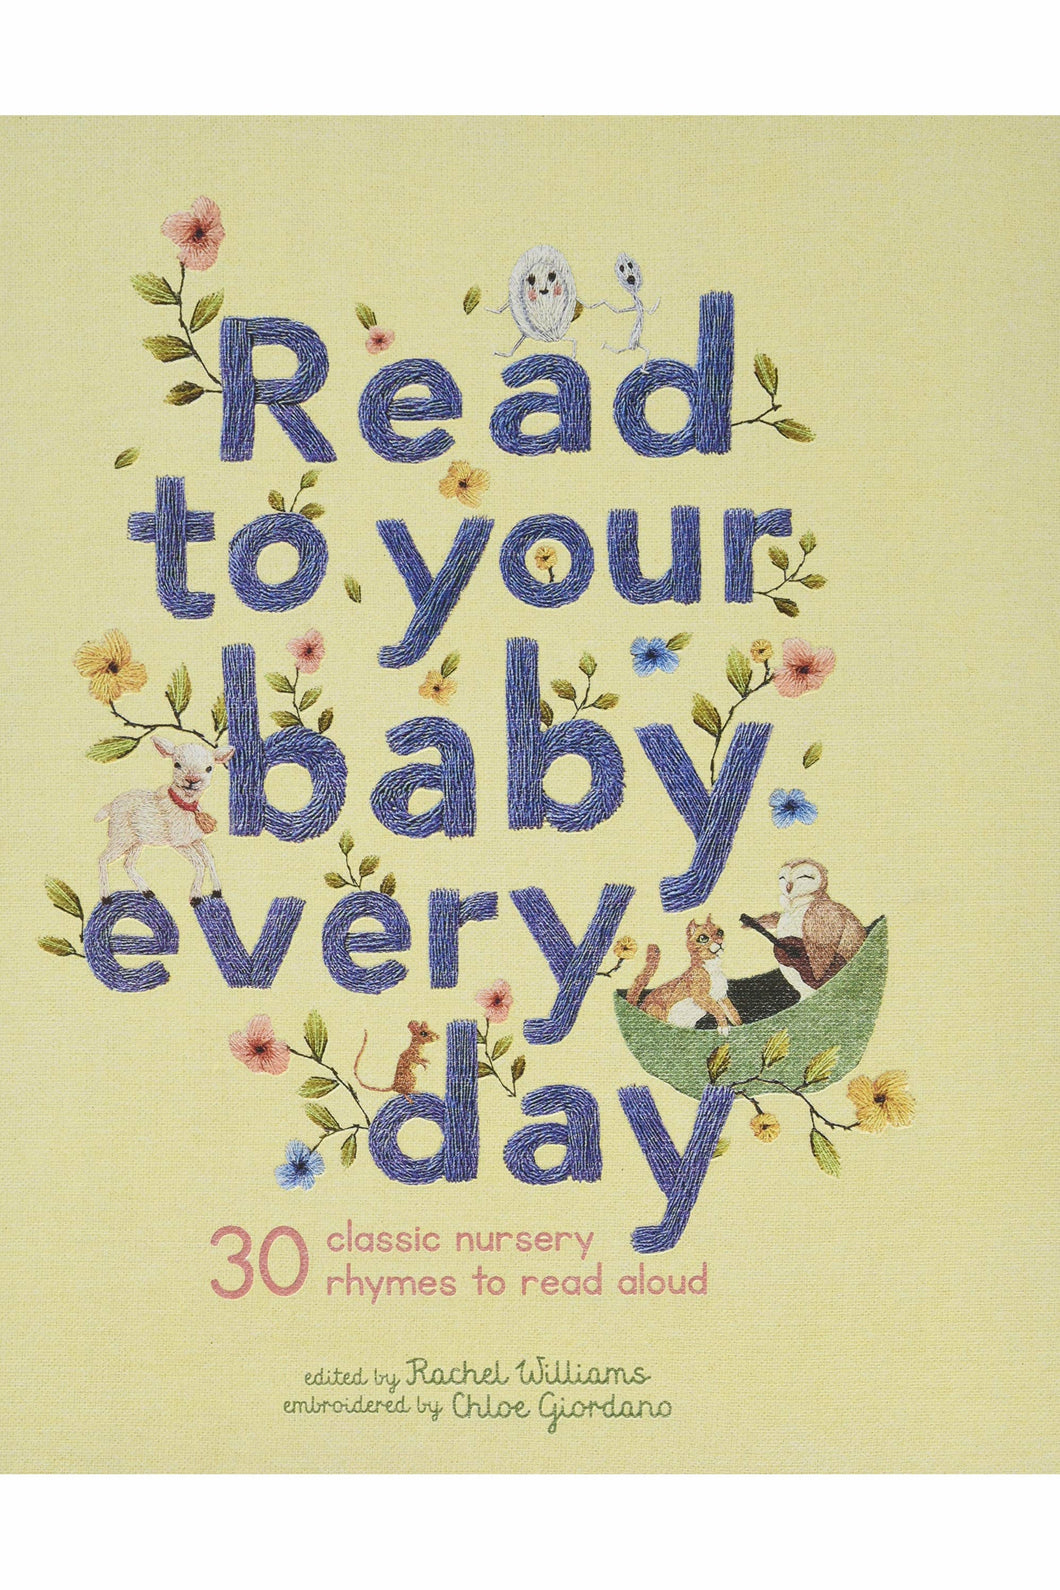 READ TO BABY